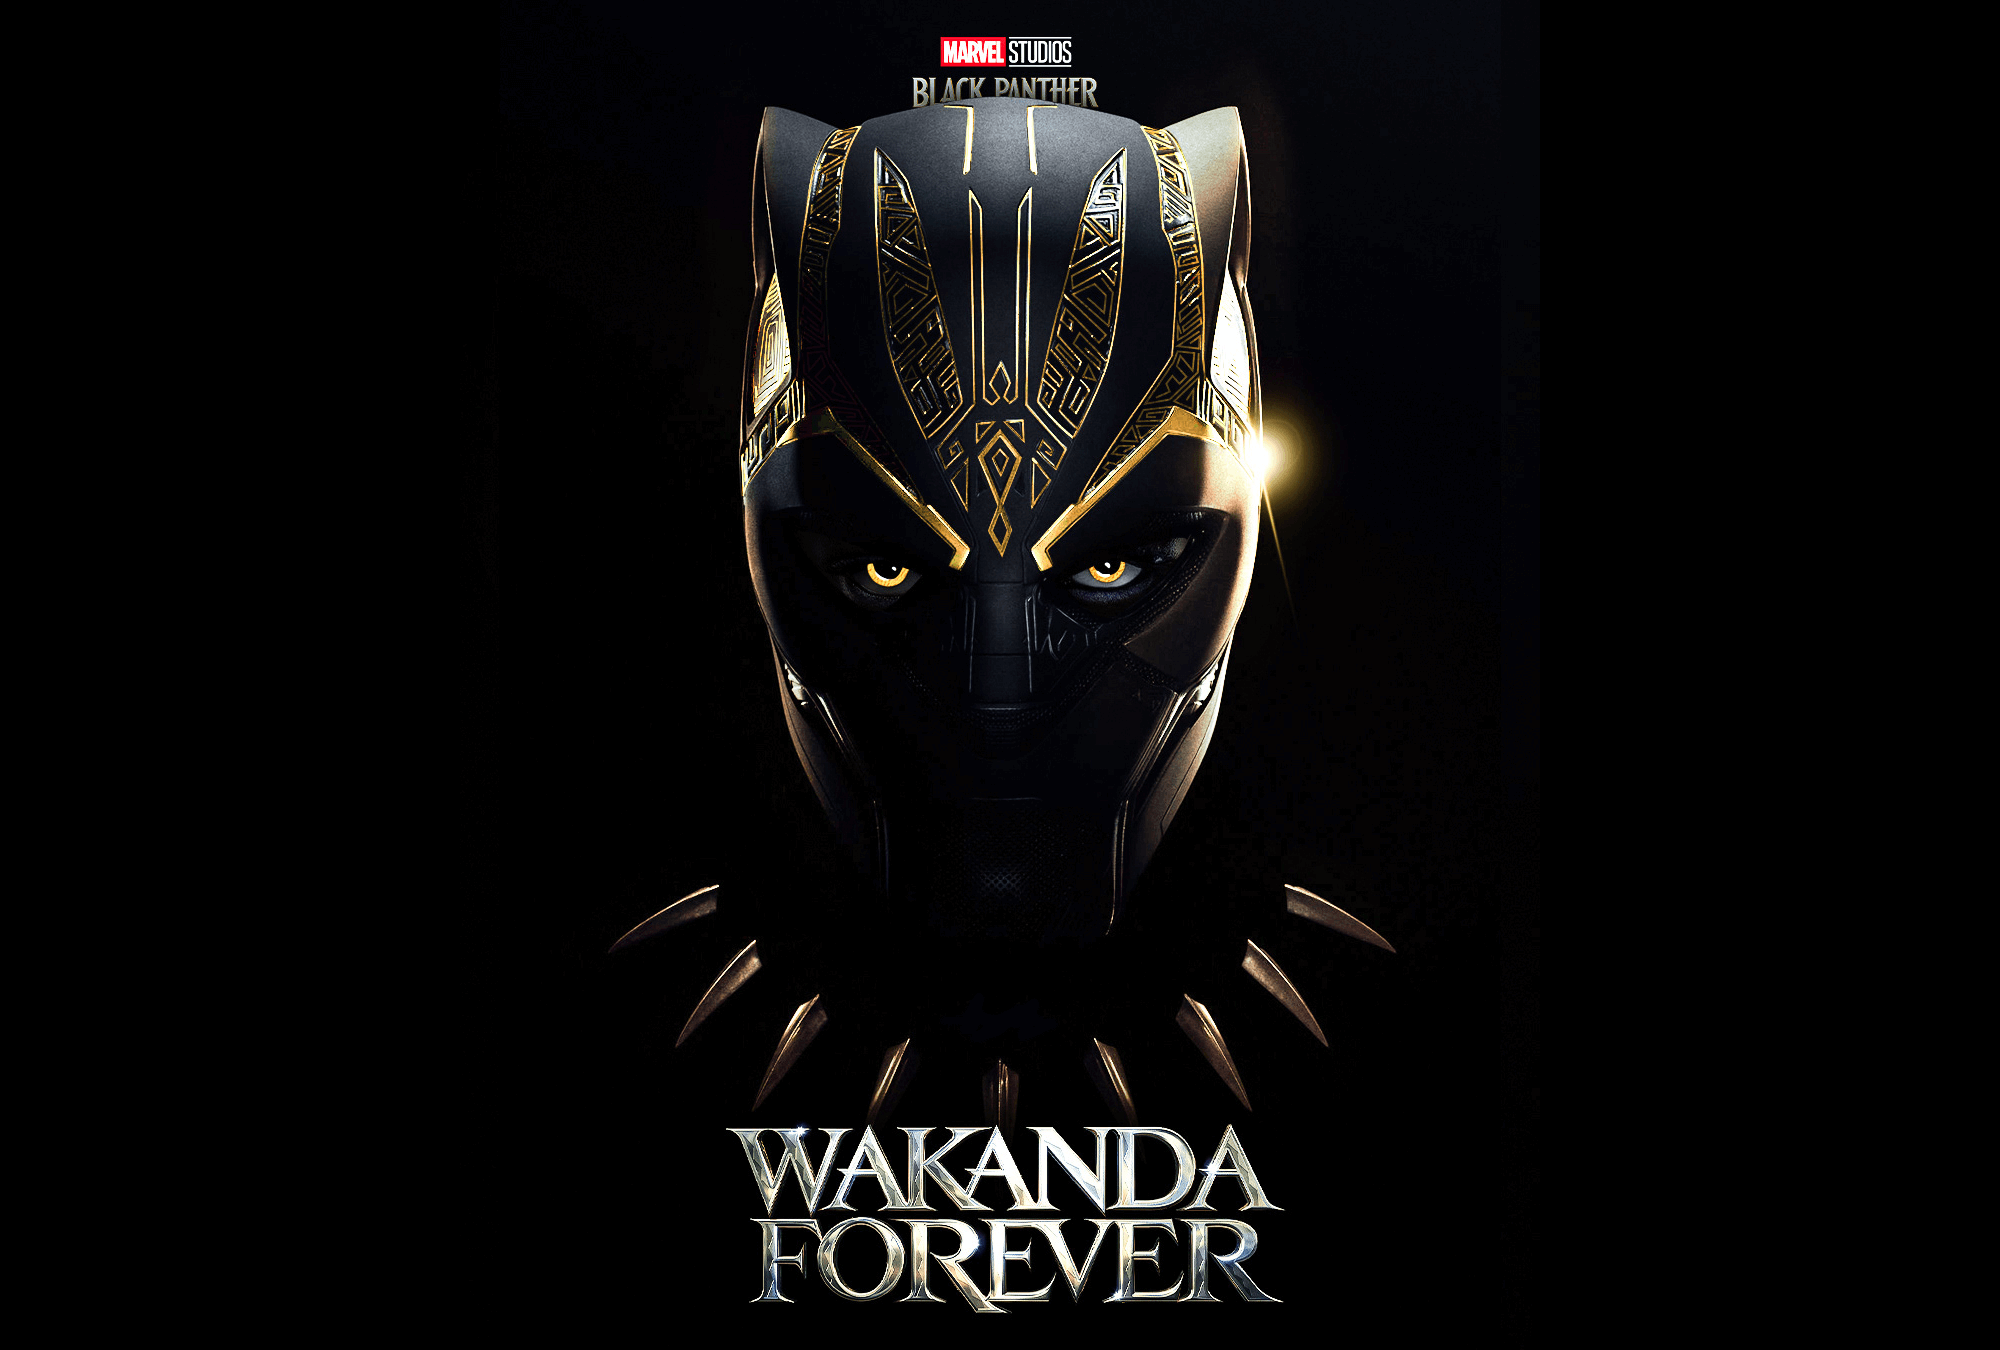 Wakanda Forever Black Panther 2 Leads in Box Office Takes